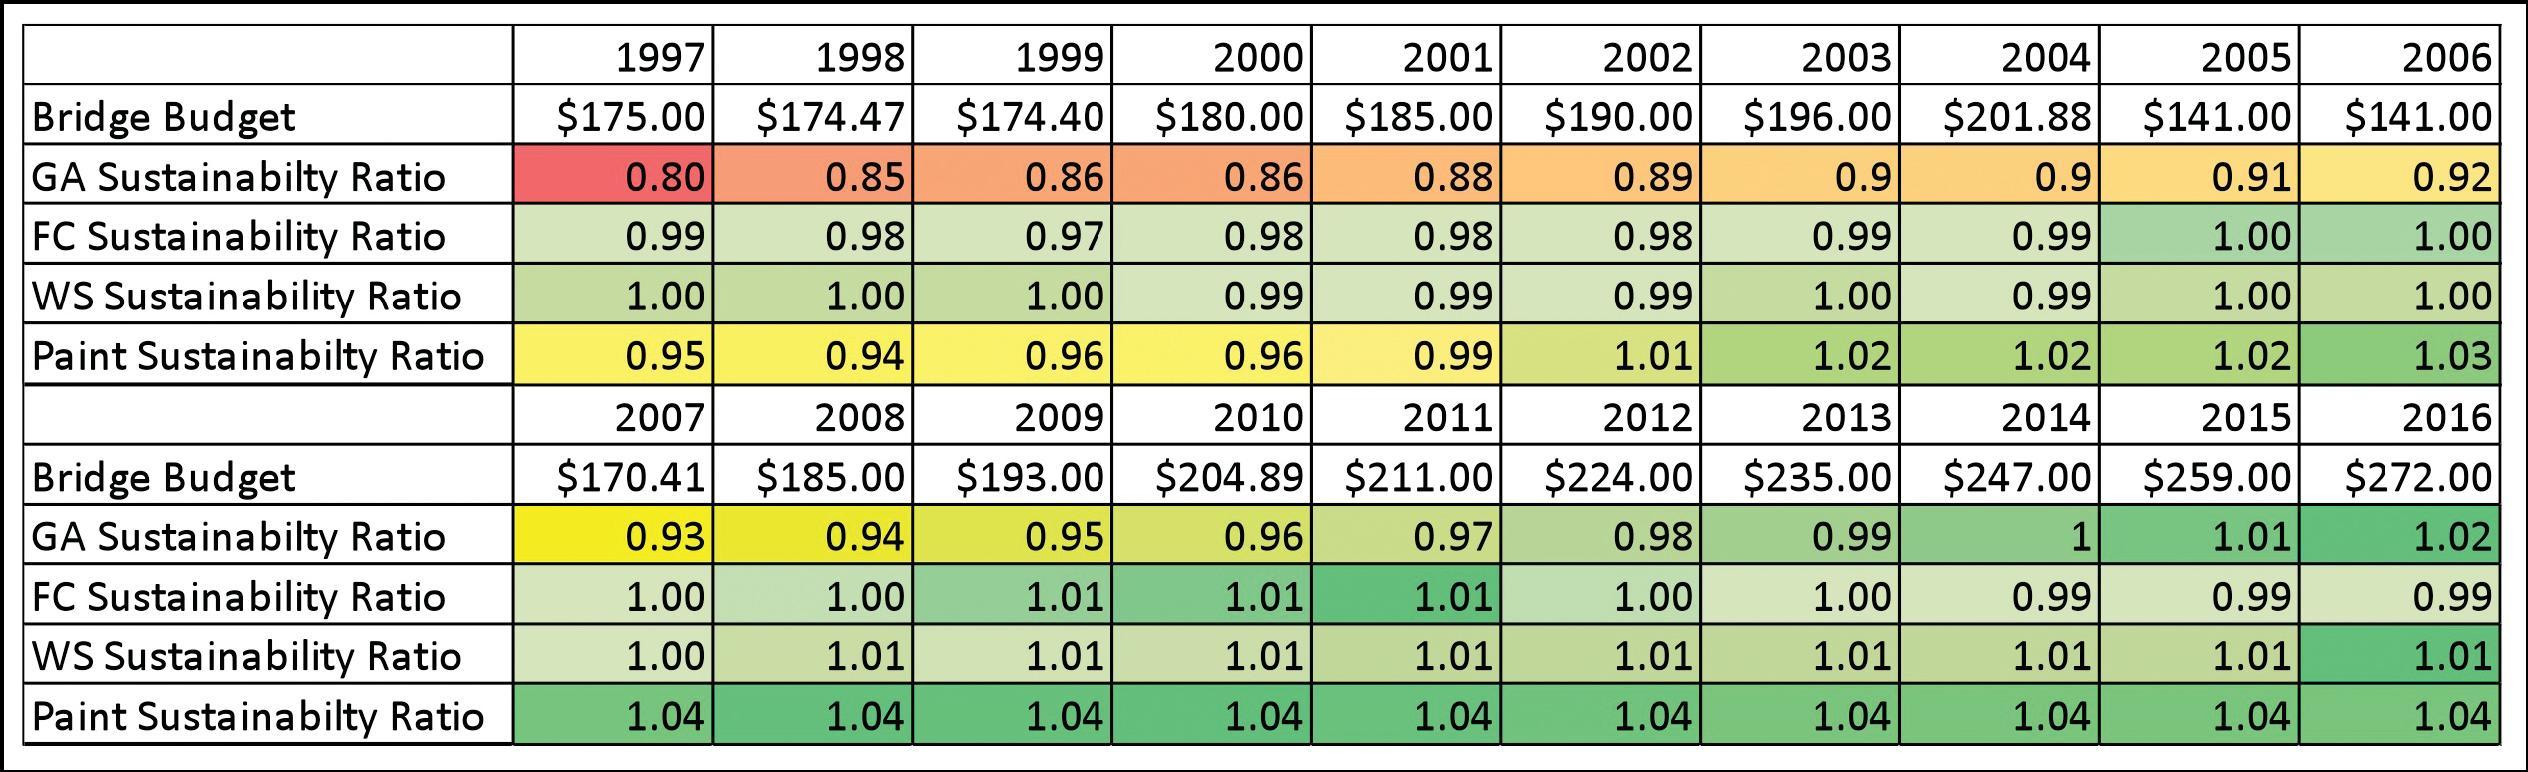 Figure 43 is another heat map but it illustrates statewide conditions in the four bridge categories from 1997 to 2016. It shows that in 1997, the lower spending for bridges and the lower condition levels created below-target conditions for the bridge general appraisal category but that conditions improved and the general appraisal targets were met by the early 2000s.  The other categories met their condition targets sooner and that is illustrated by the predominance of green colors in the cells that indicate the other bridge condition categories.  Each cell also has a sustinability ratio for each year.  When targets were not met, the sustainabiity ratios also were lower, often in the 80 percent range. As conditions improved, the sustainability ratios also rose.